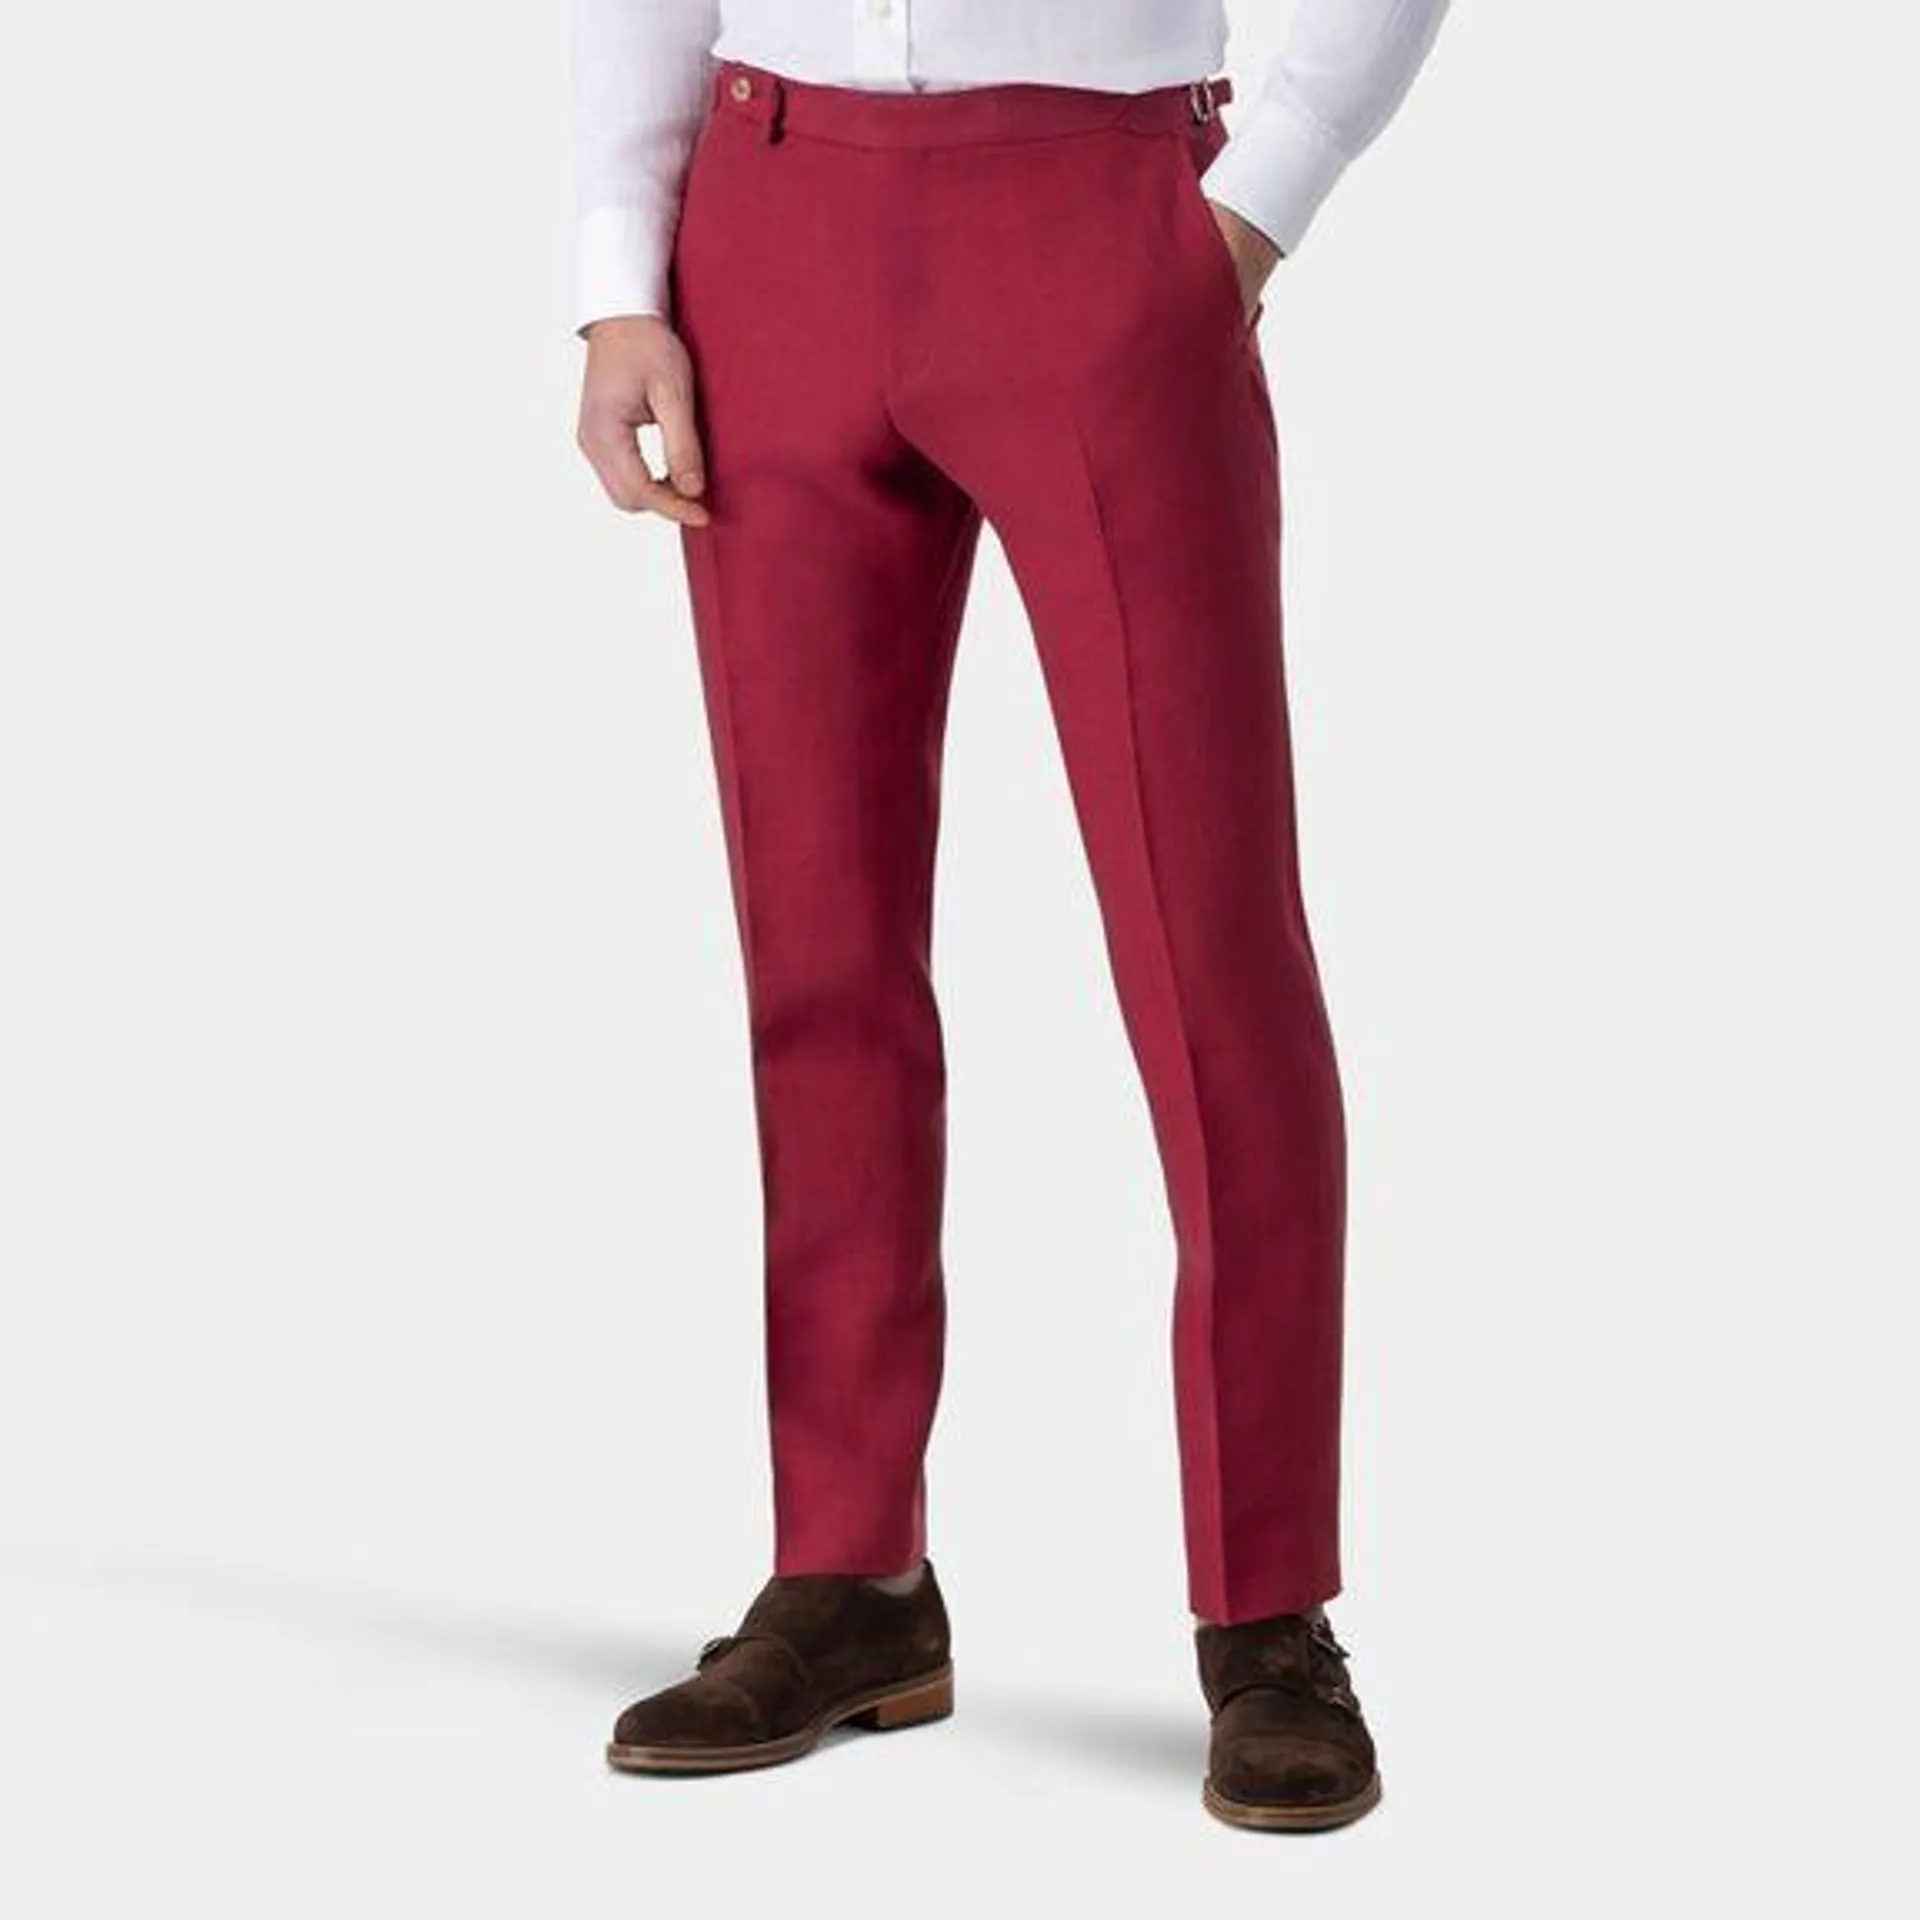 Raspberry red suit pants